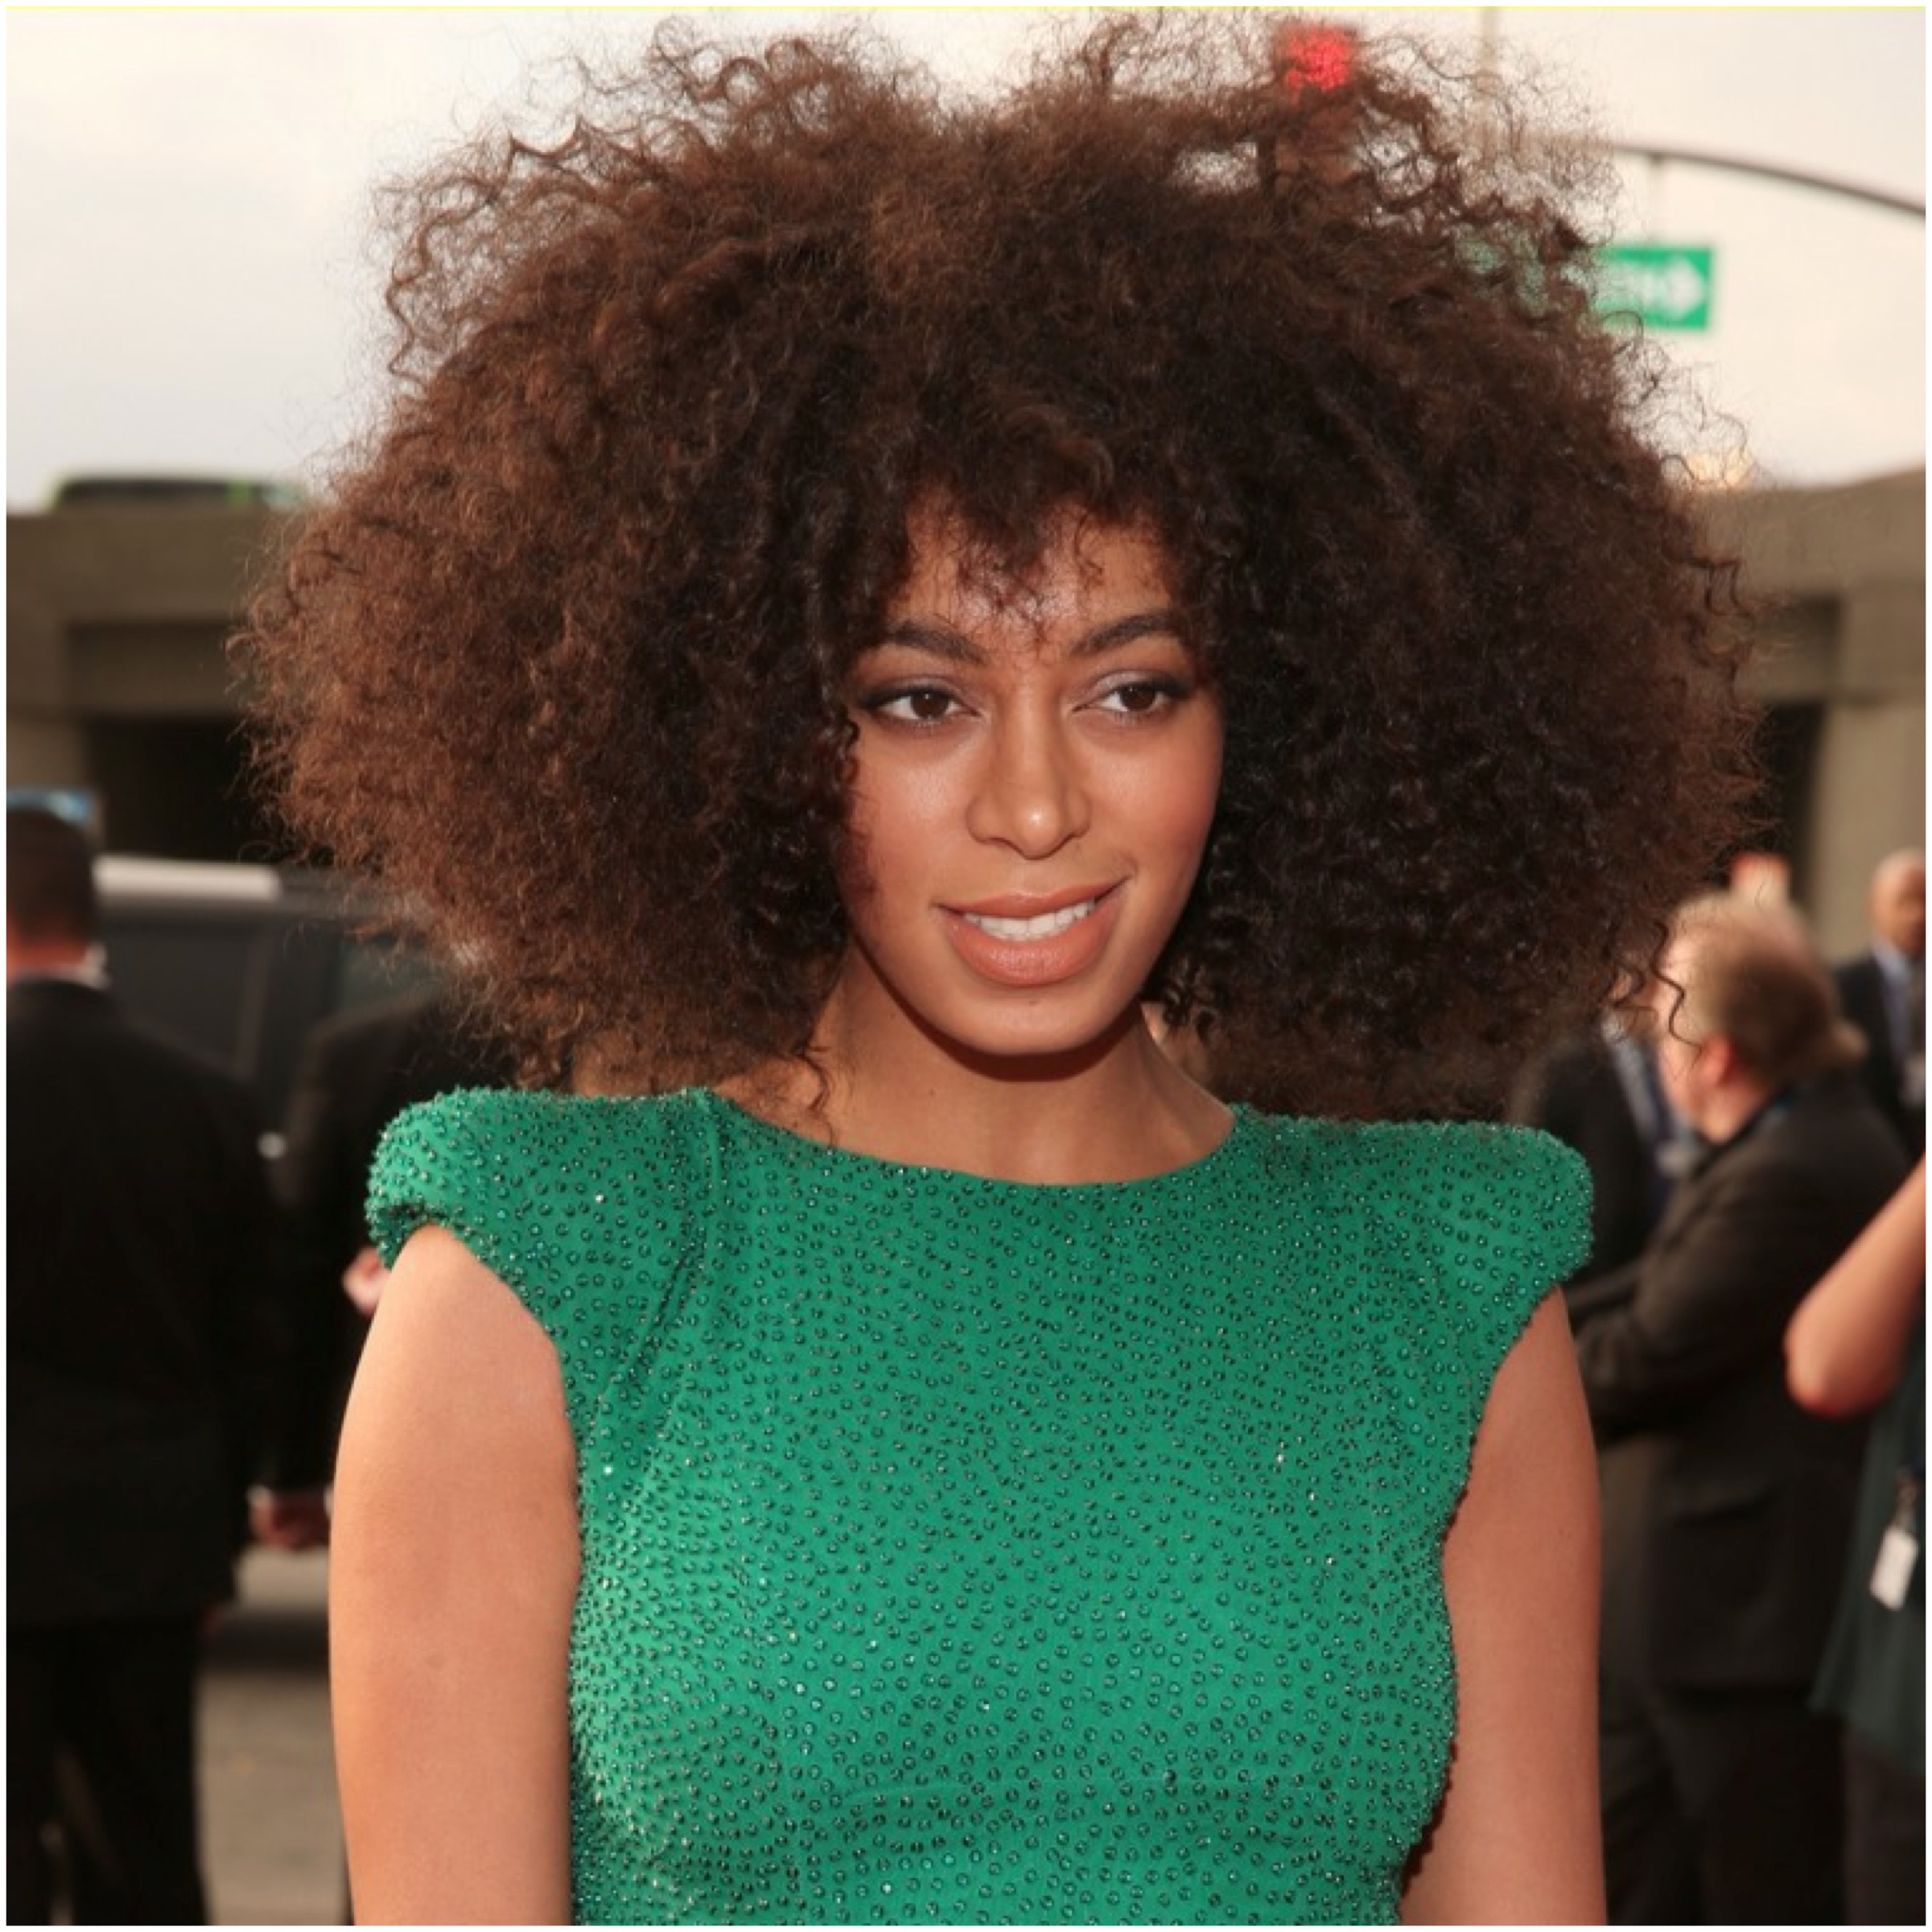 solange-knowles-wallpaper